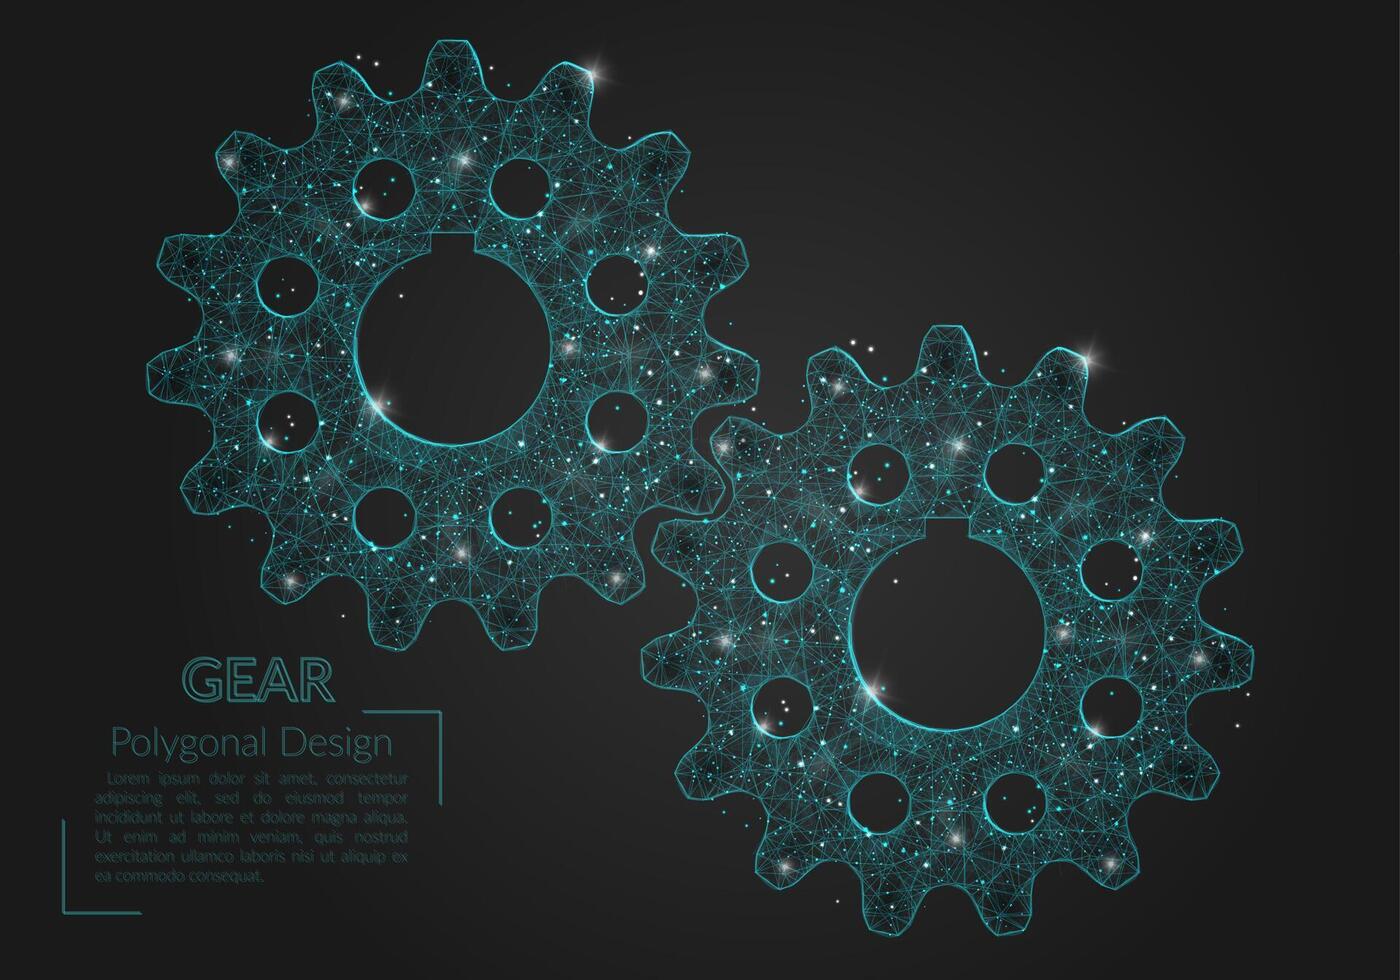 Abstract isolated blue image of a gear. Polygonal illustration looks like stars in the blask night sky in spase or flying glass shards. Digital design for website, web, internet vector